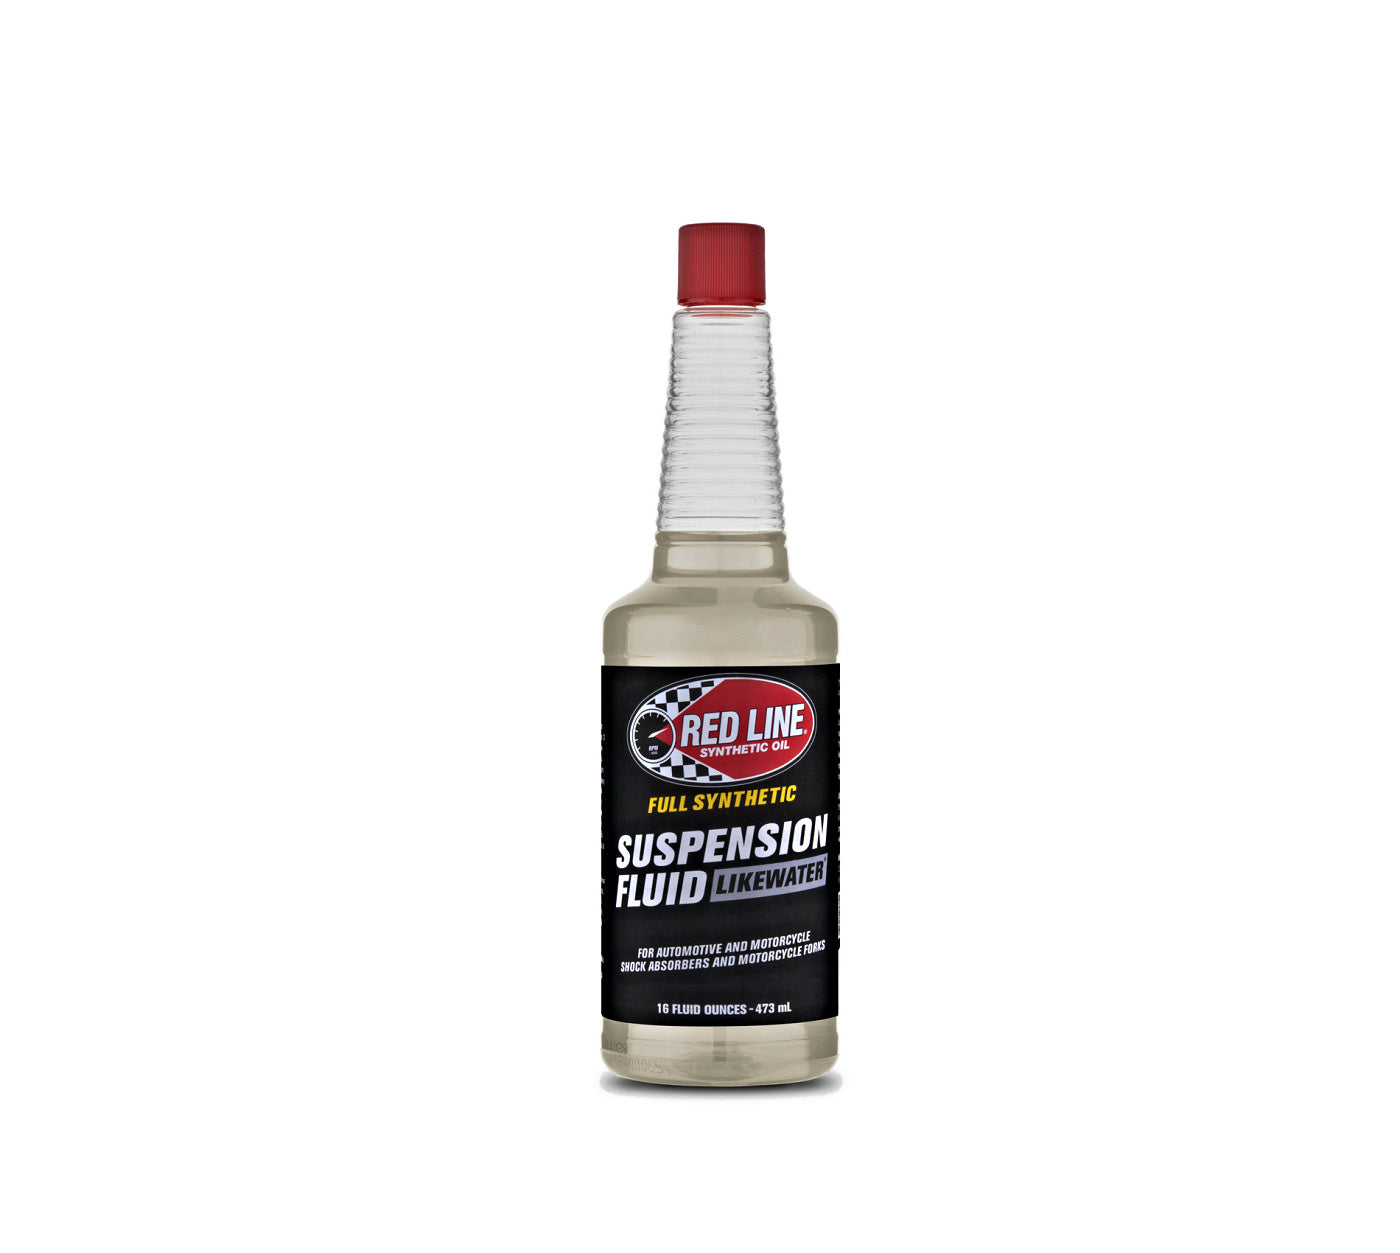 RED LINE OIL 91102 Suspension Fluid LikeWater 0.47 L (16 oz) Photo-1 